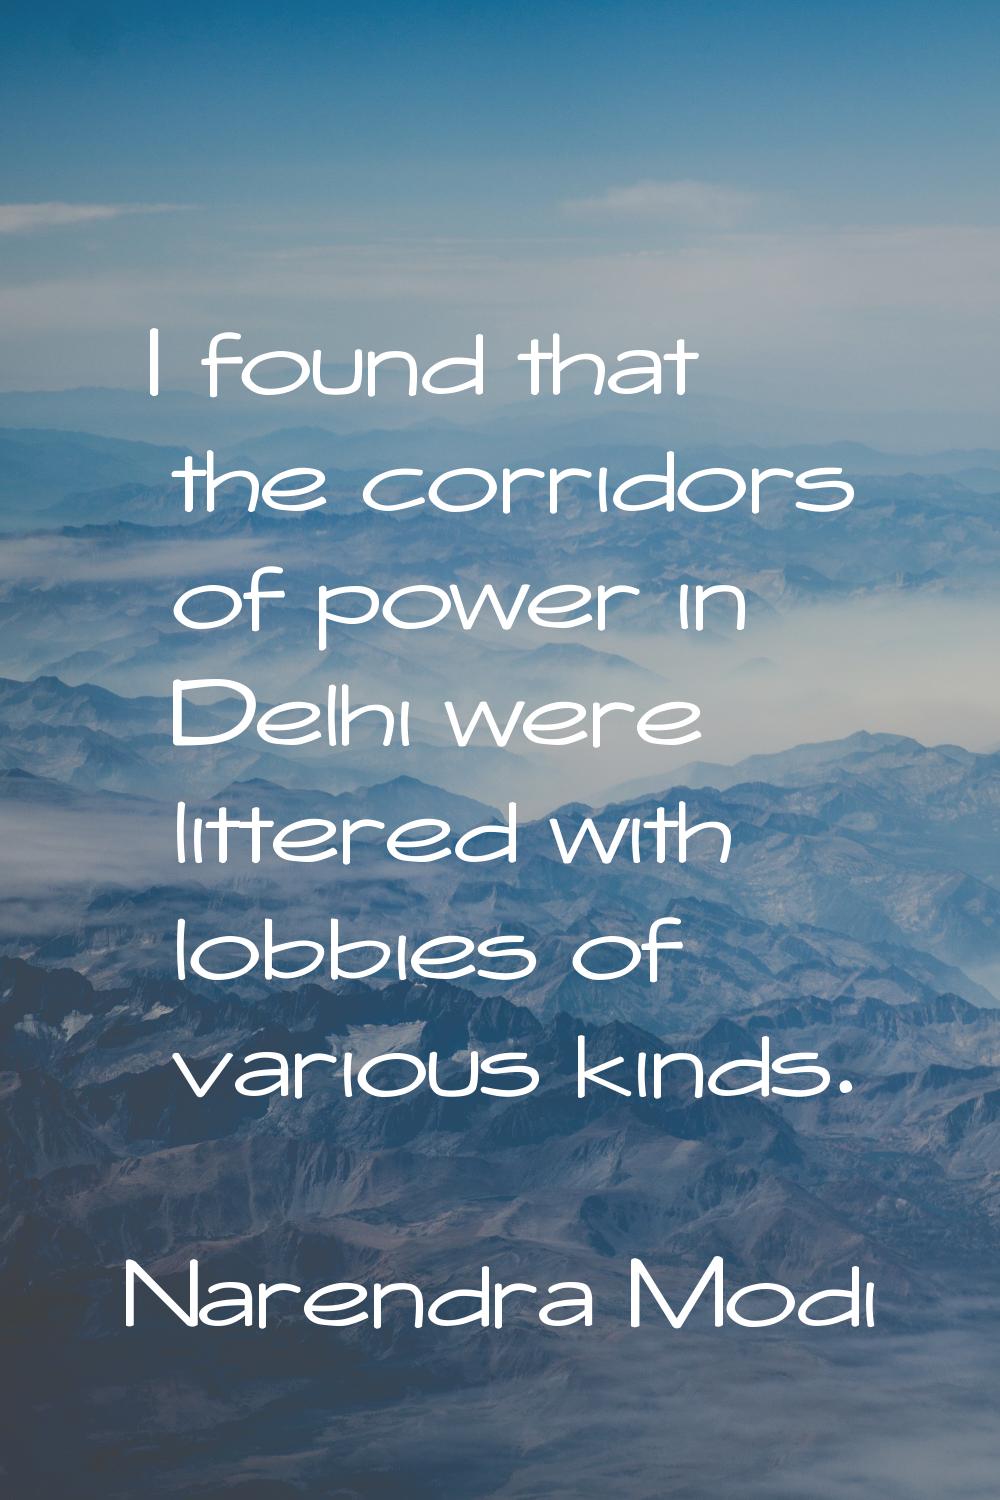 I found that the corridors of power in Delhi were littered with lobbies of various kinds.